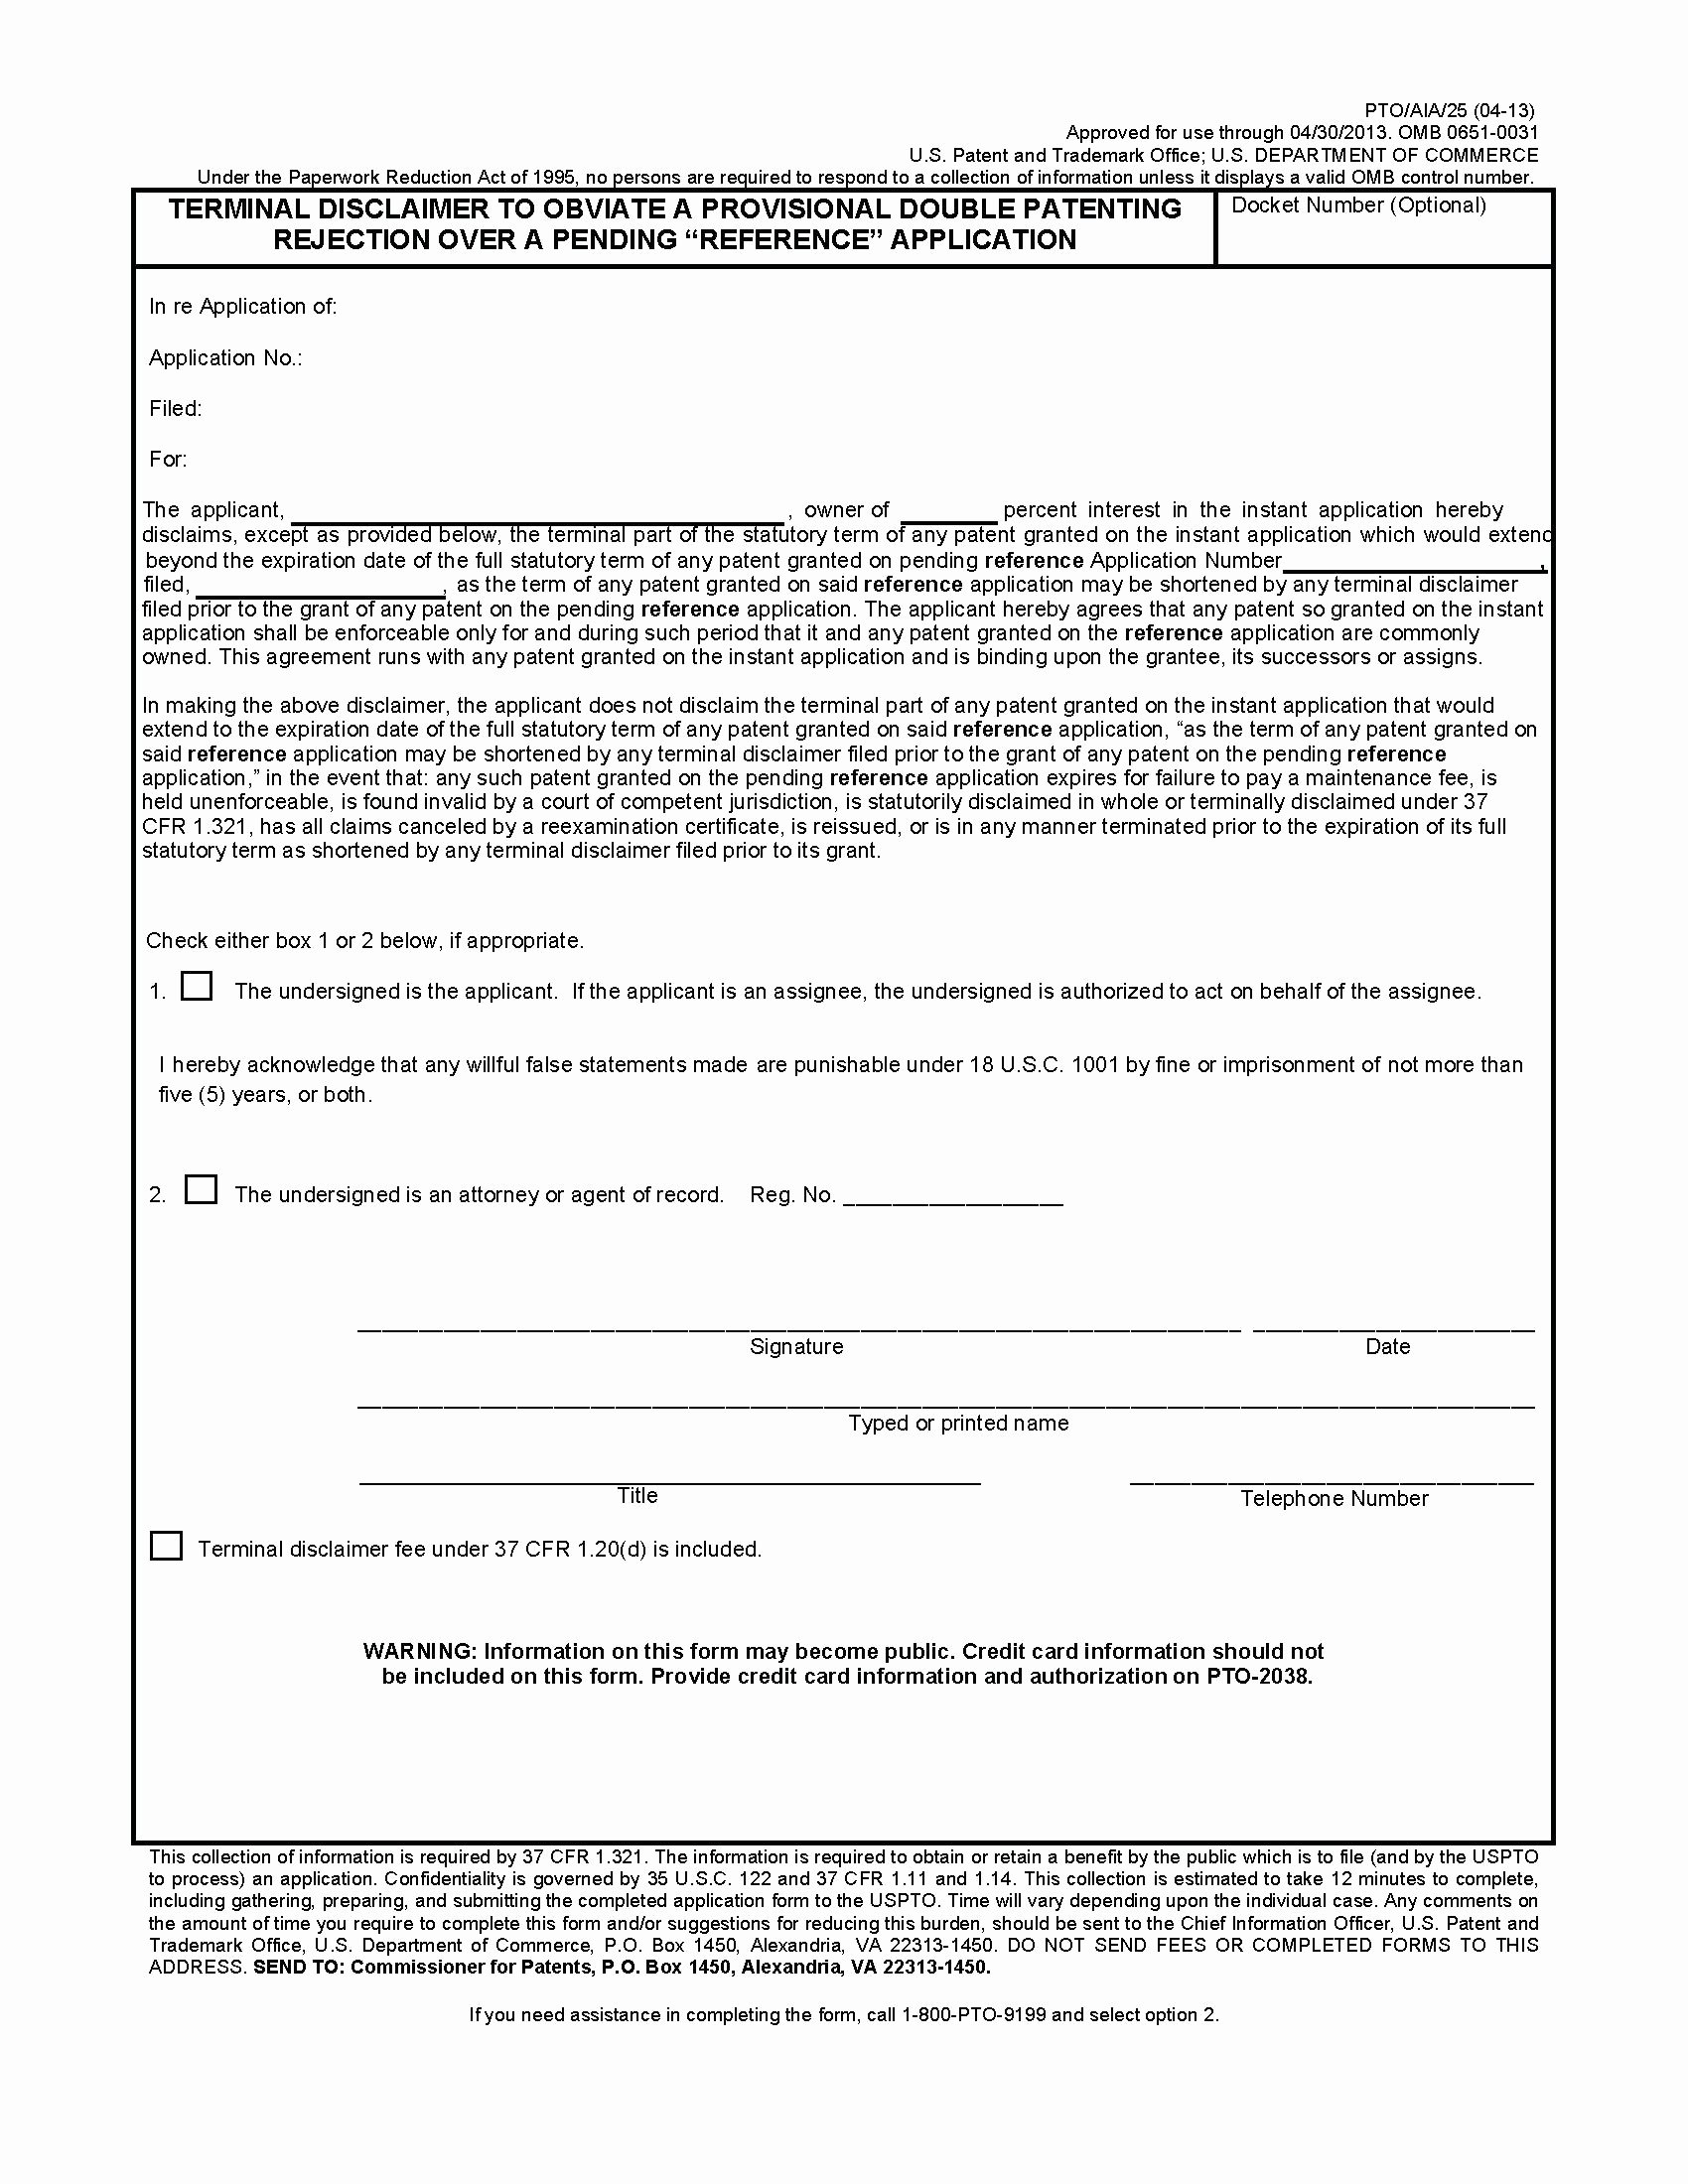 Provisional Patent Application form Inspirational Provisional Patent Template